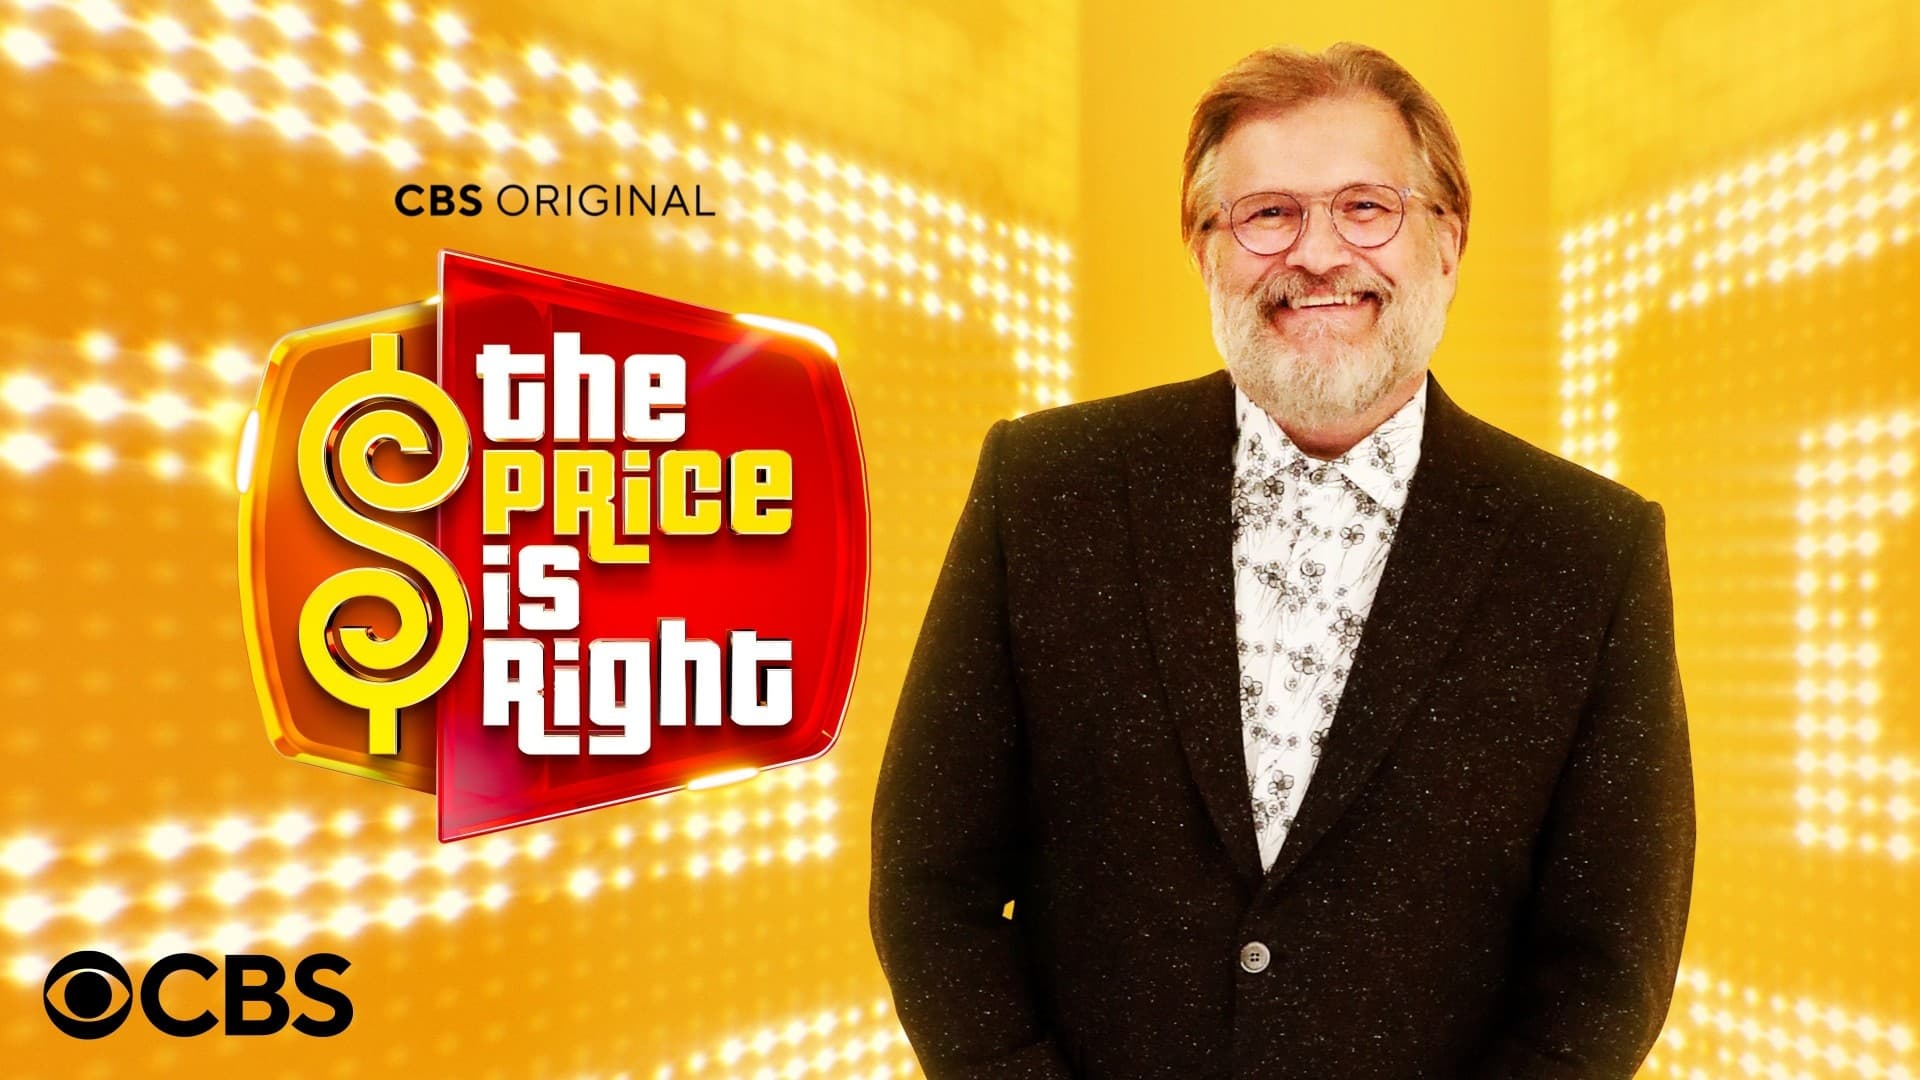 The Price Is Right - Season 3 Episode 4 : The Price Is Right Season 3 Episode 4